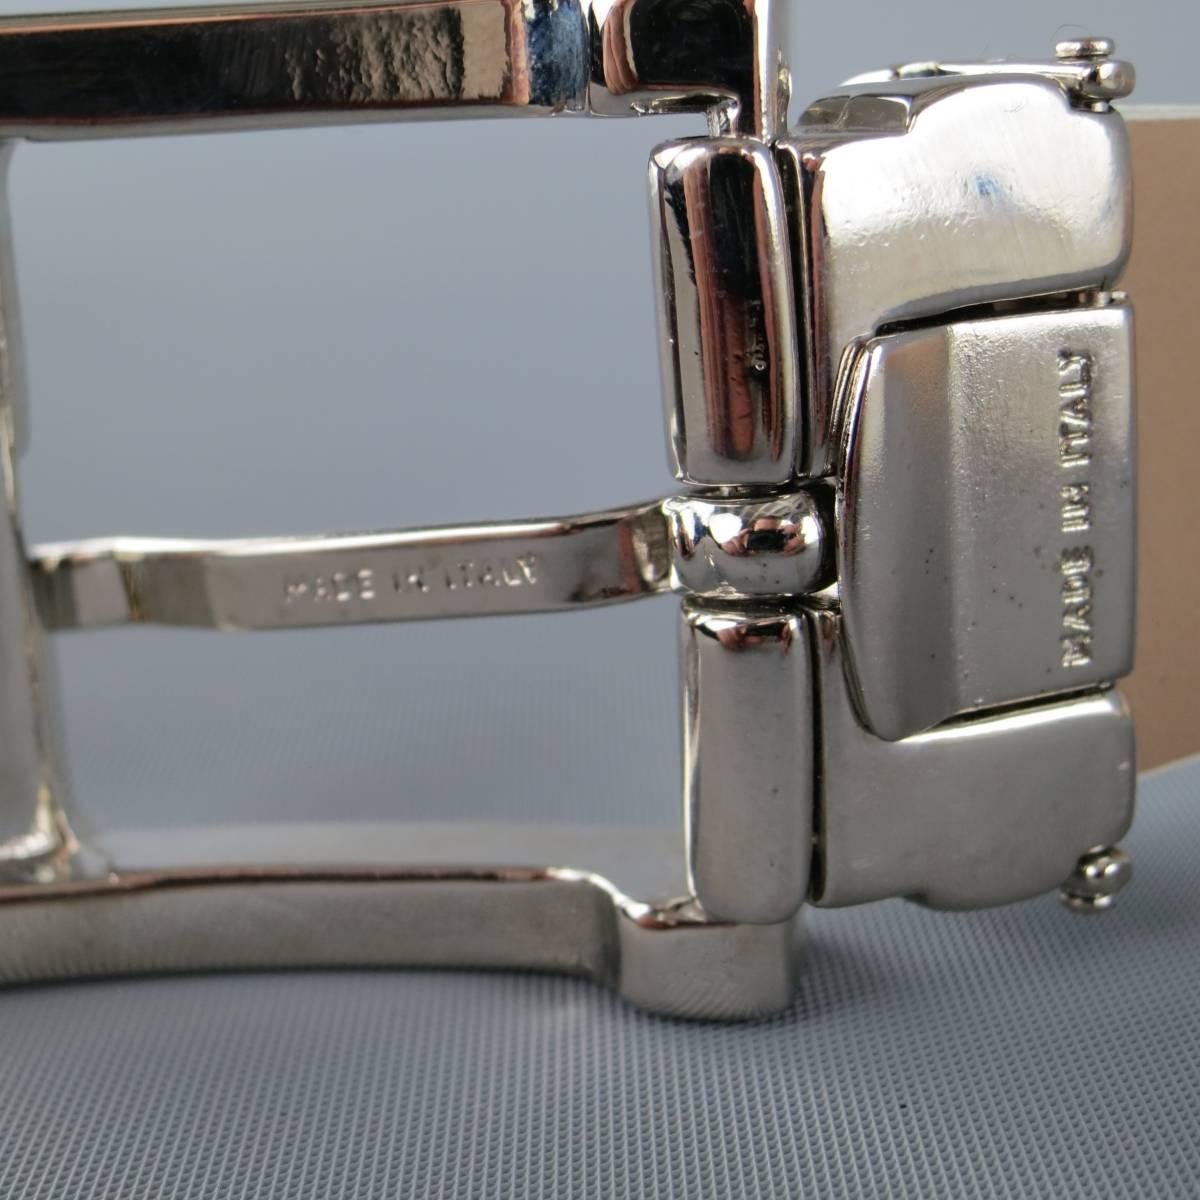 EMPORIO ARMANI dress belt comes in an off white crocodile texture embossed leather with a polished silver tone metal buckle. Wear throughout. As-Is. Made in Italy.
 
Fair Pre-Owned Condition.
Marked: YEMN16
 
Length: 41 in.
Width: 1 in.
Fits: 34.5 -